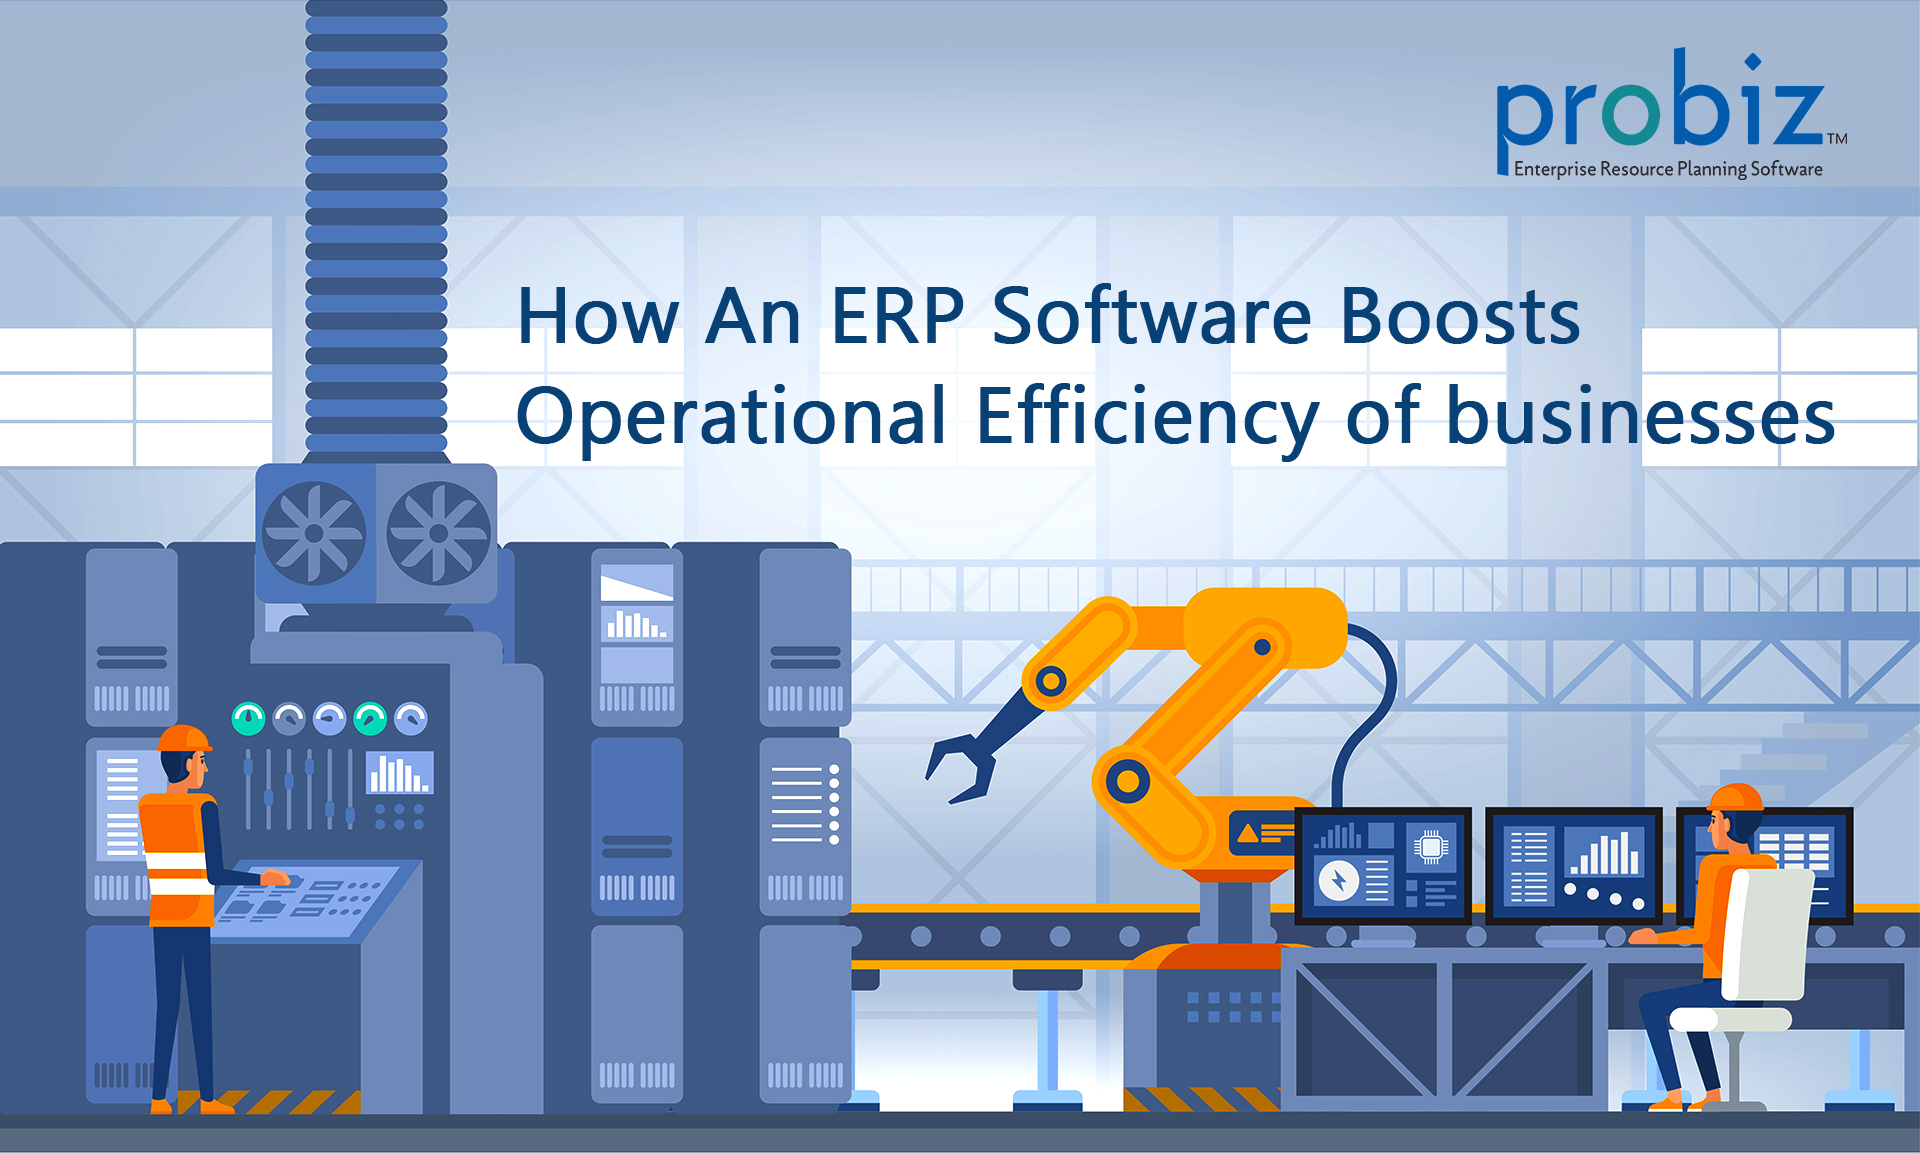 How An ERP Software Boosts Operational Efficiency of businesses